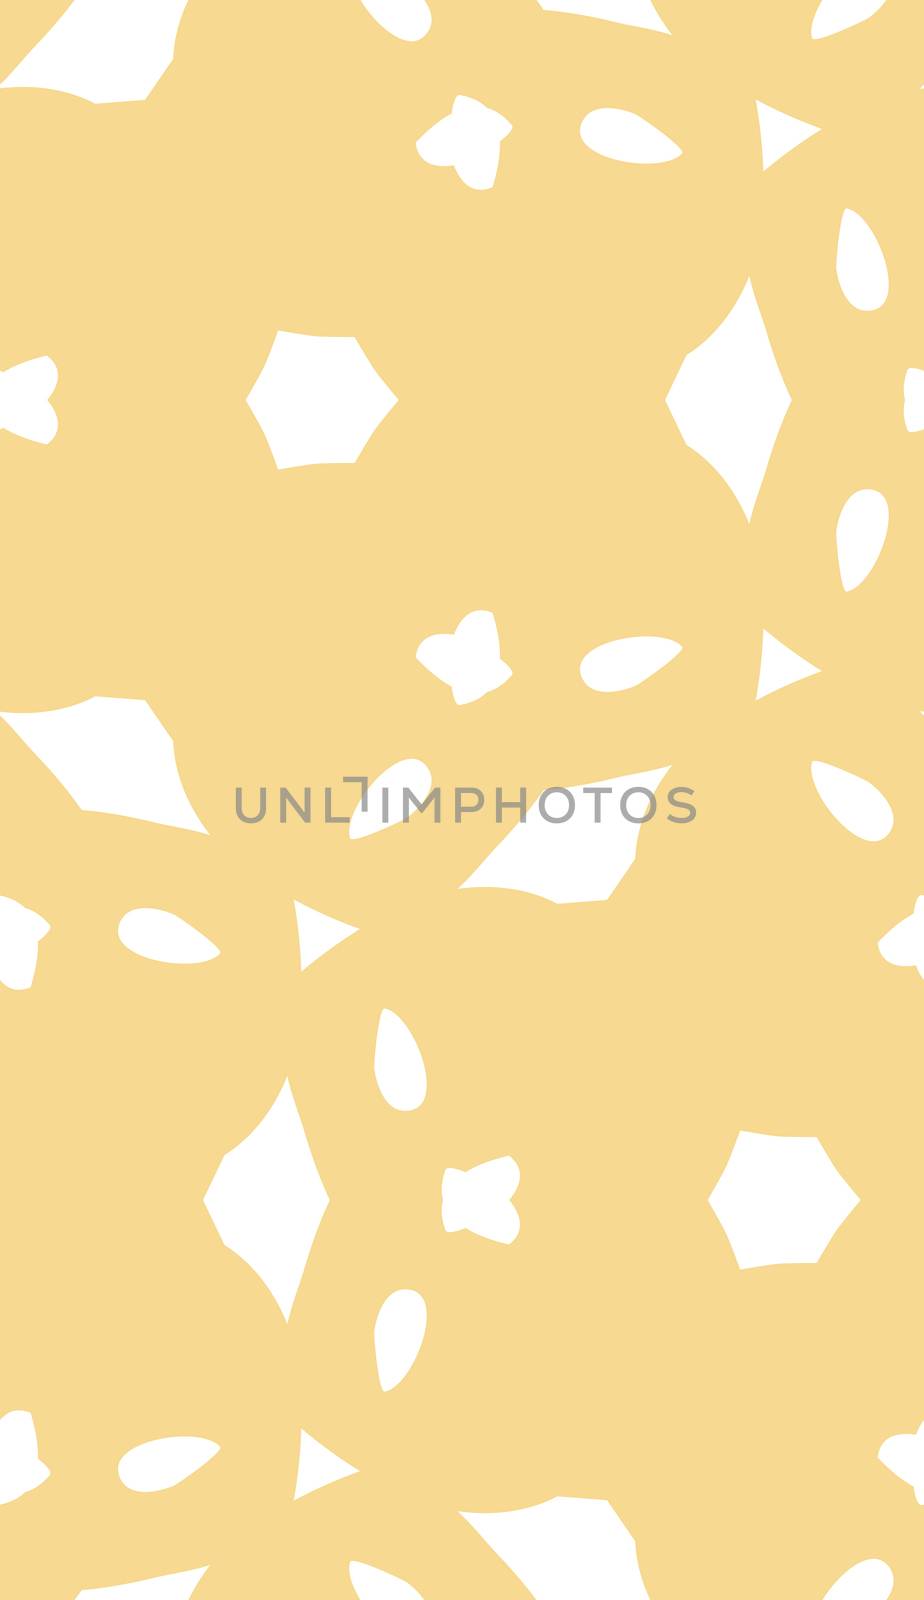 Seamless pattern of odd abstract white shapes over light brown